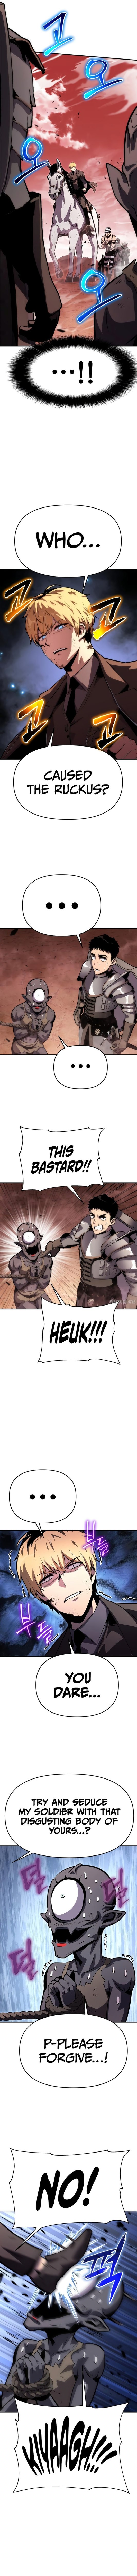 the-knight-king-who-returned-with-a-god-chap-31-4